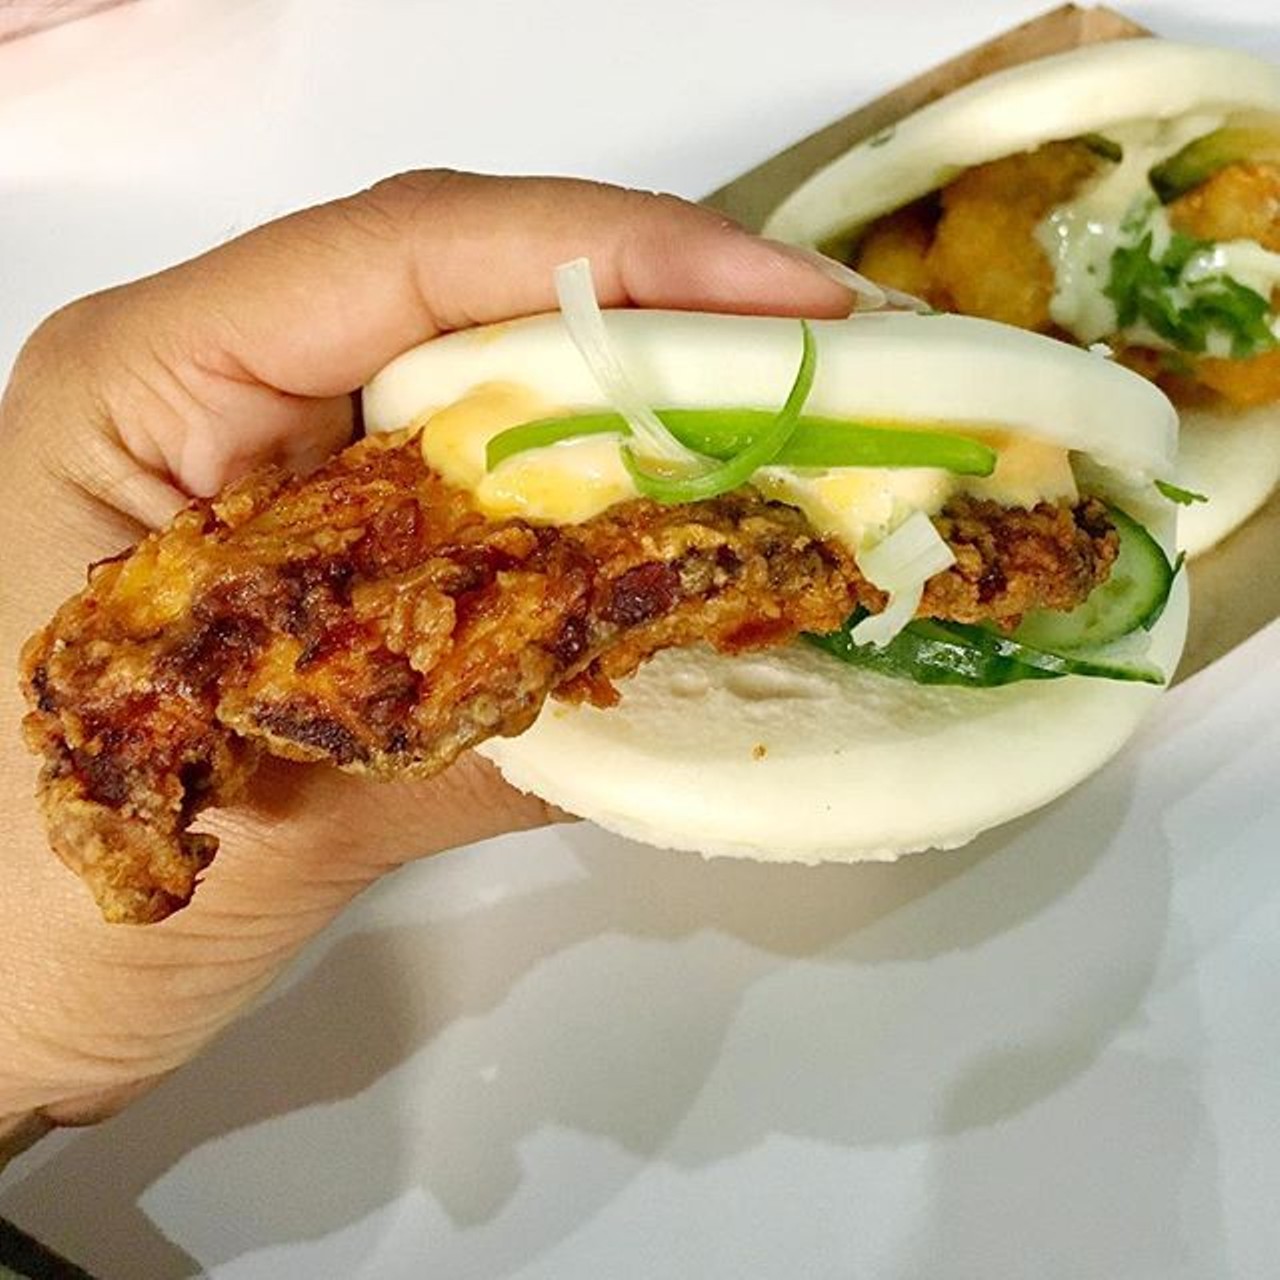 Kickin&#146; Chicken Bao at King Bao
710 N. Mills Ave., 407-237-0013
Like the name advertises, this fried chicken bao definitely has a kick and a touch of sweetness with its cucumber sriracha aioli.
Photo via blanquiqui/Instagram